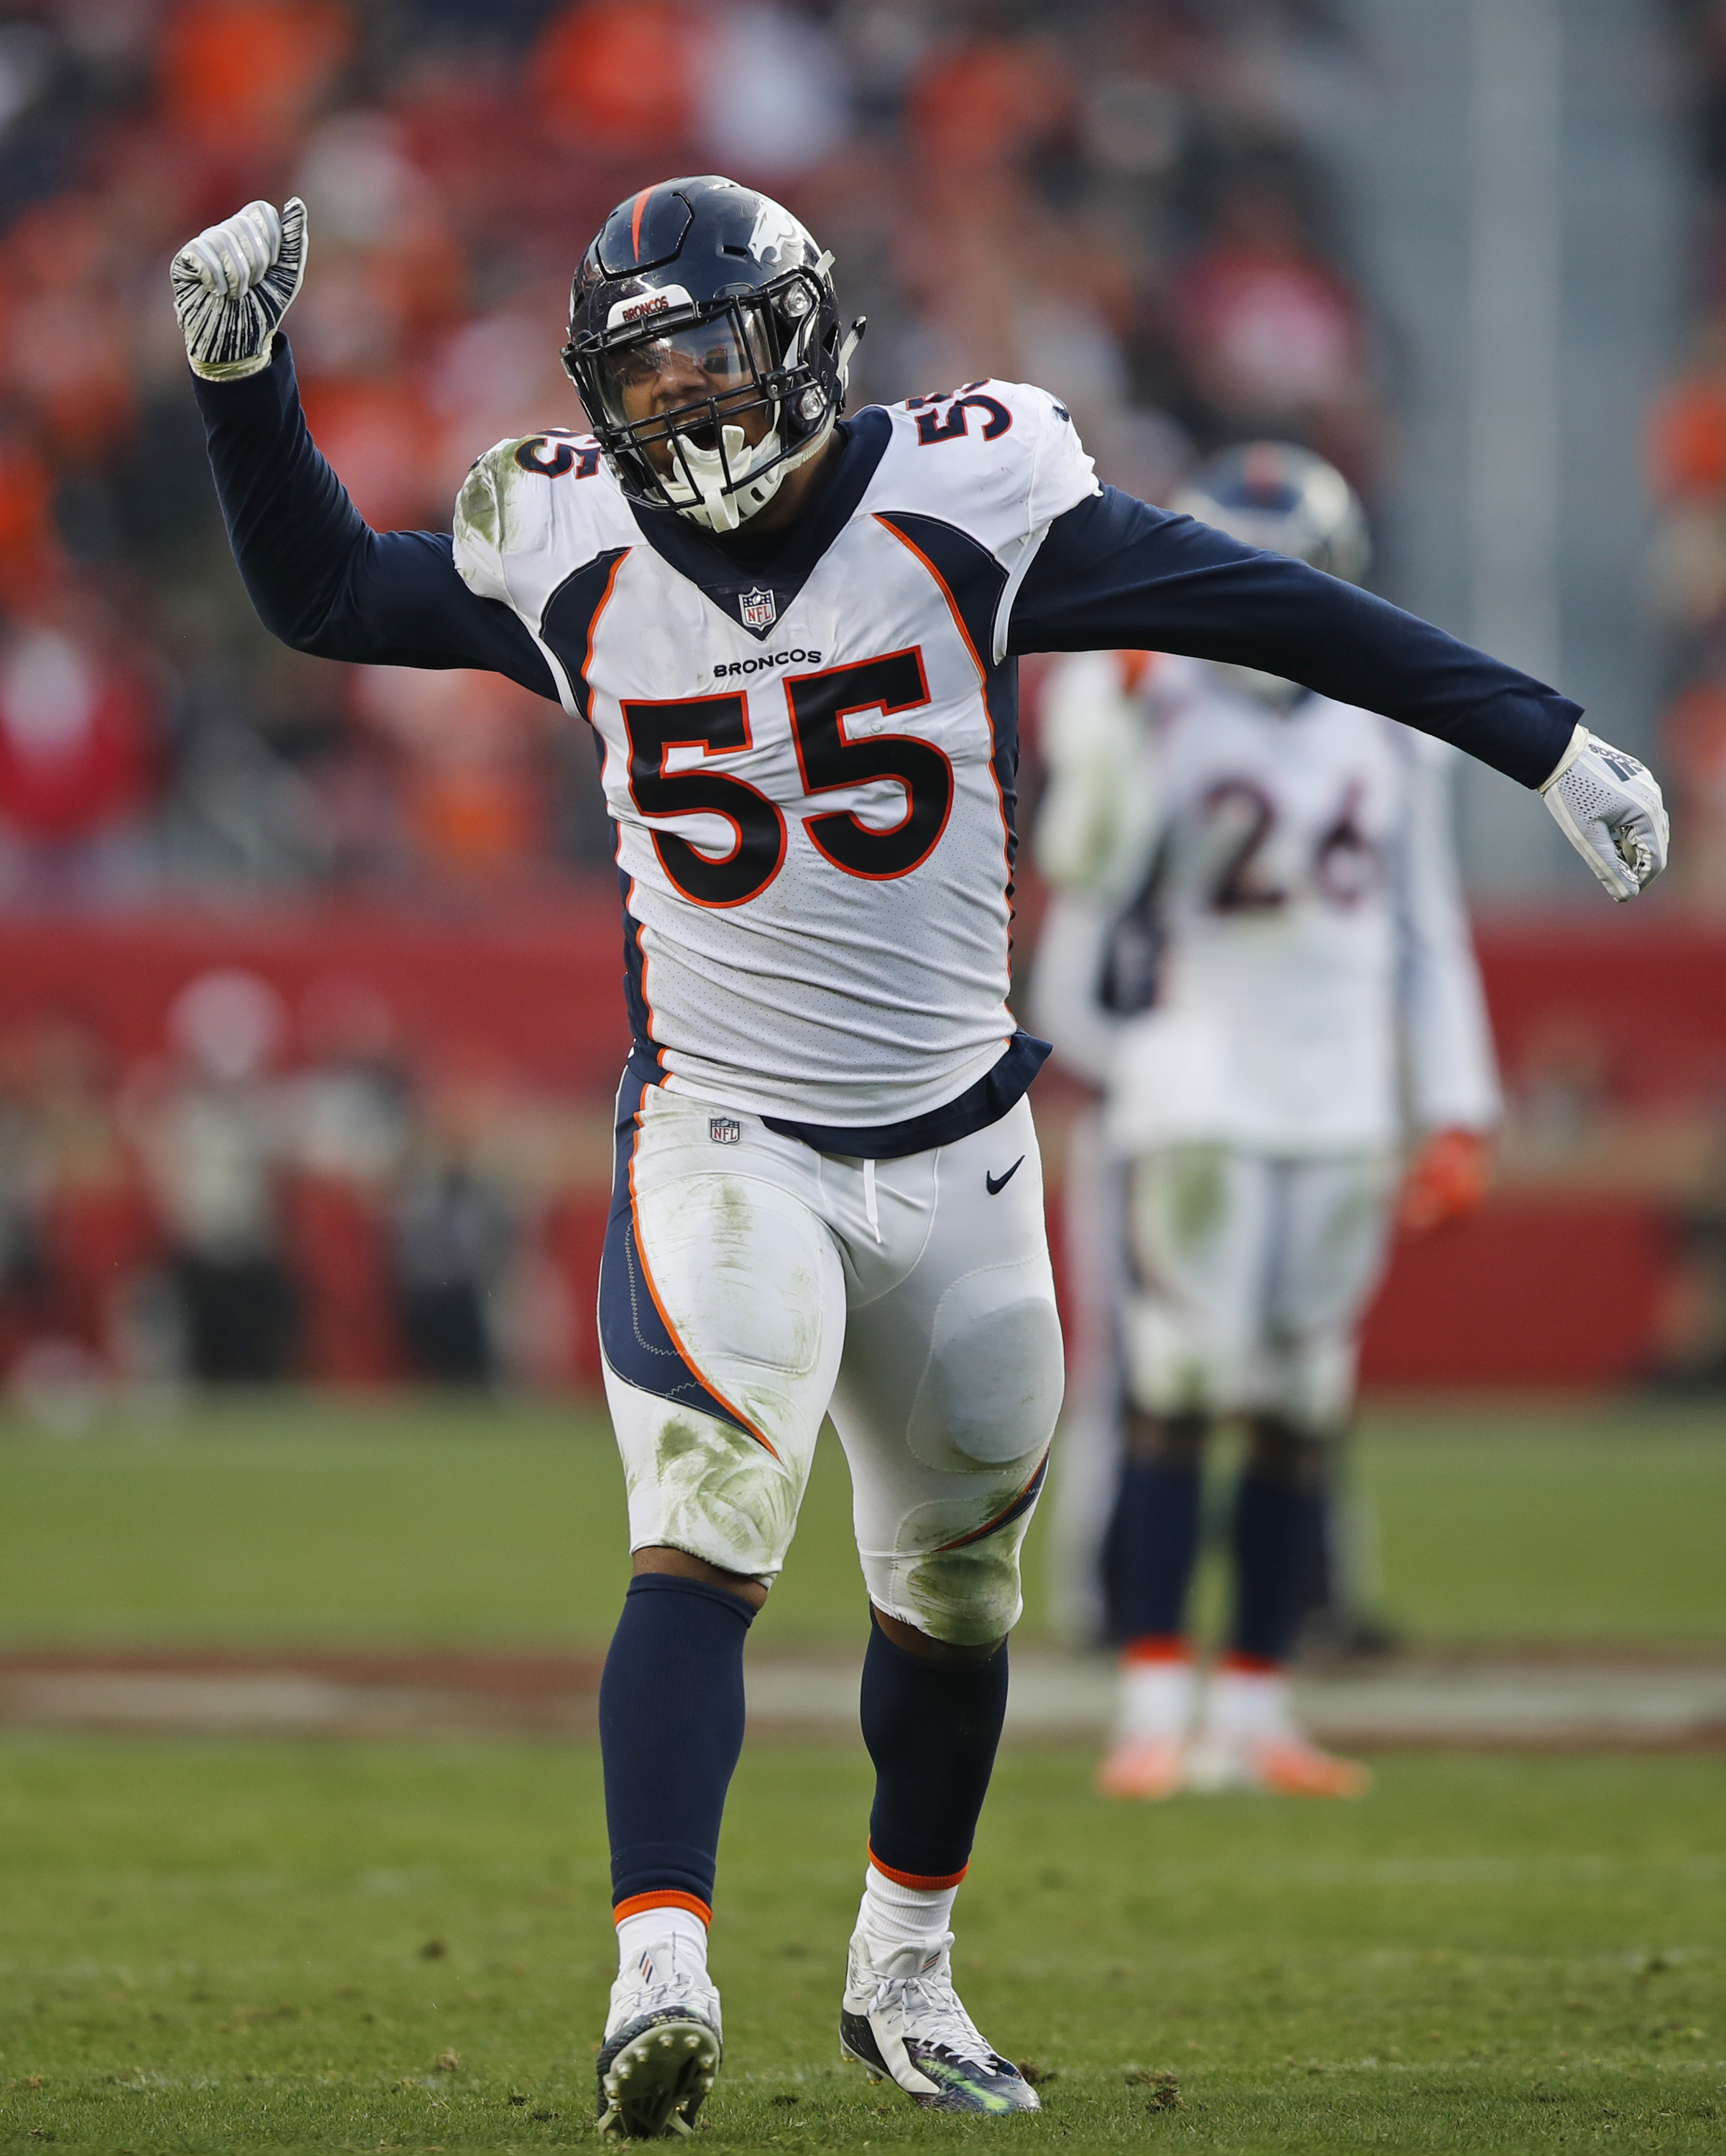 Undermanned, overmatched Broncos fall behind, lose to 49ers